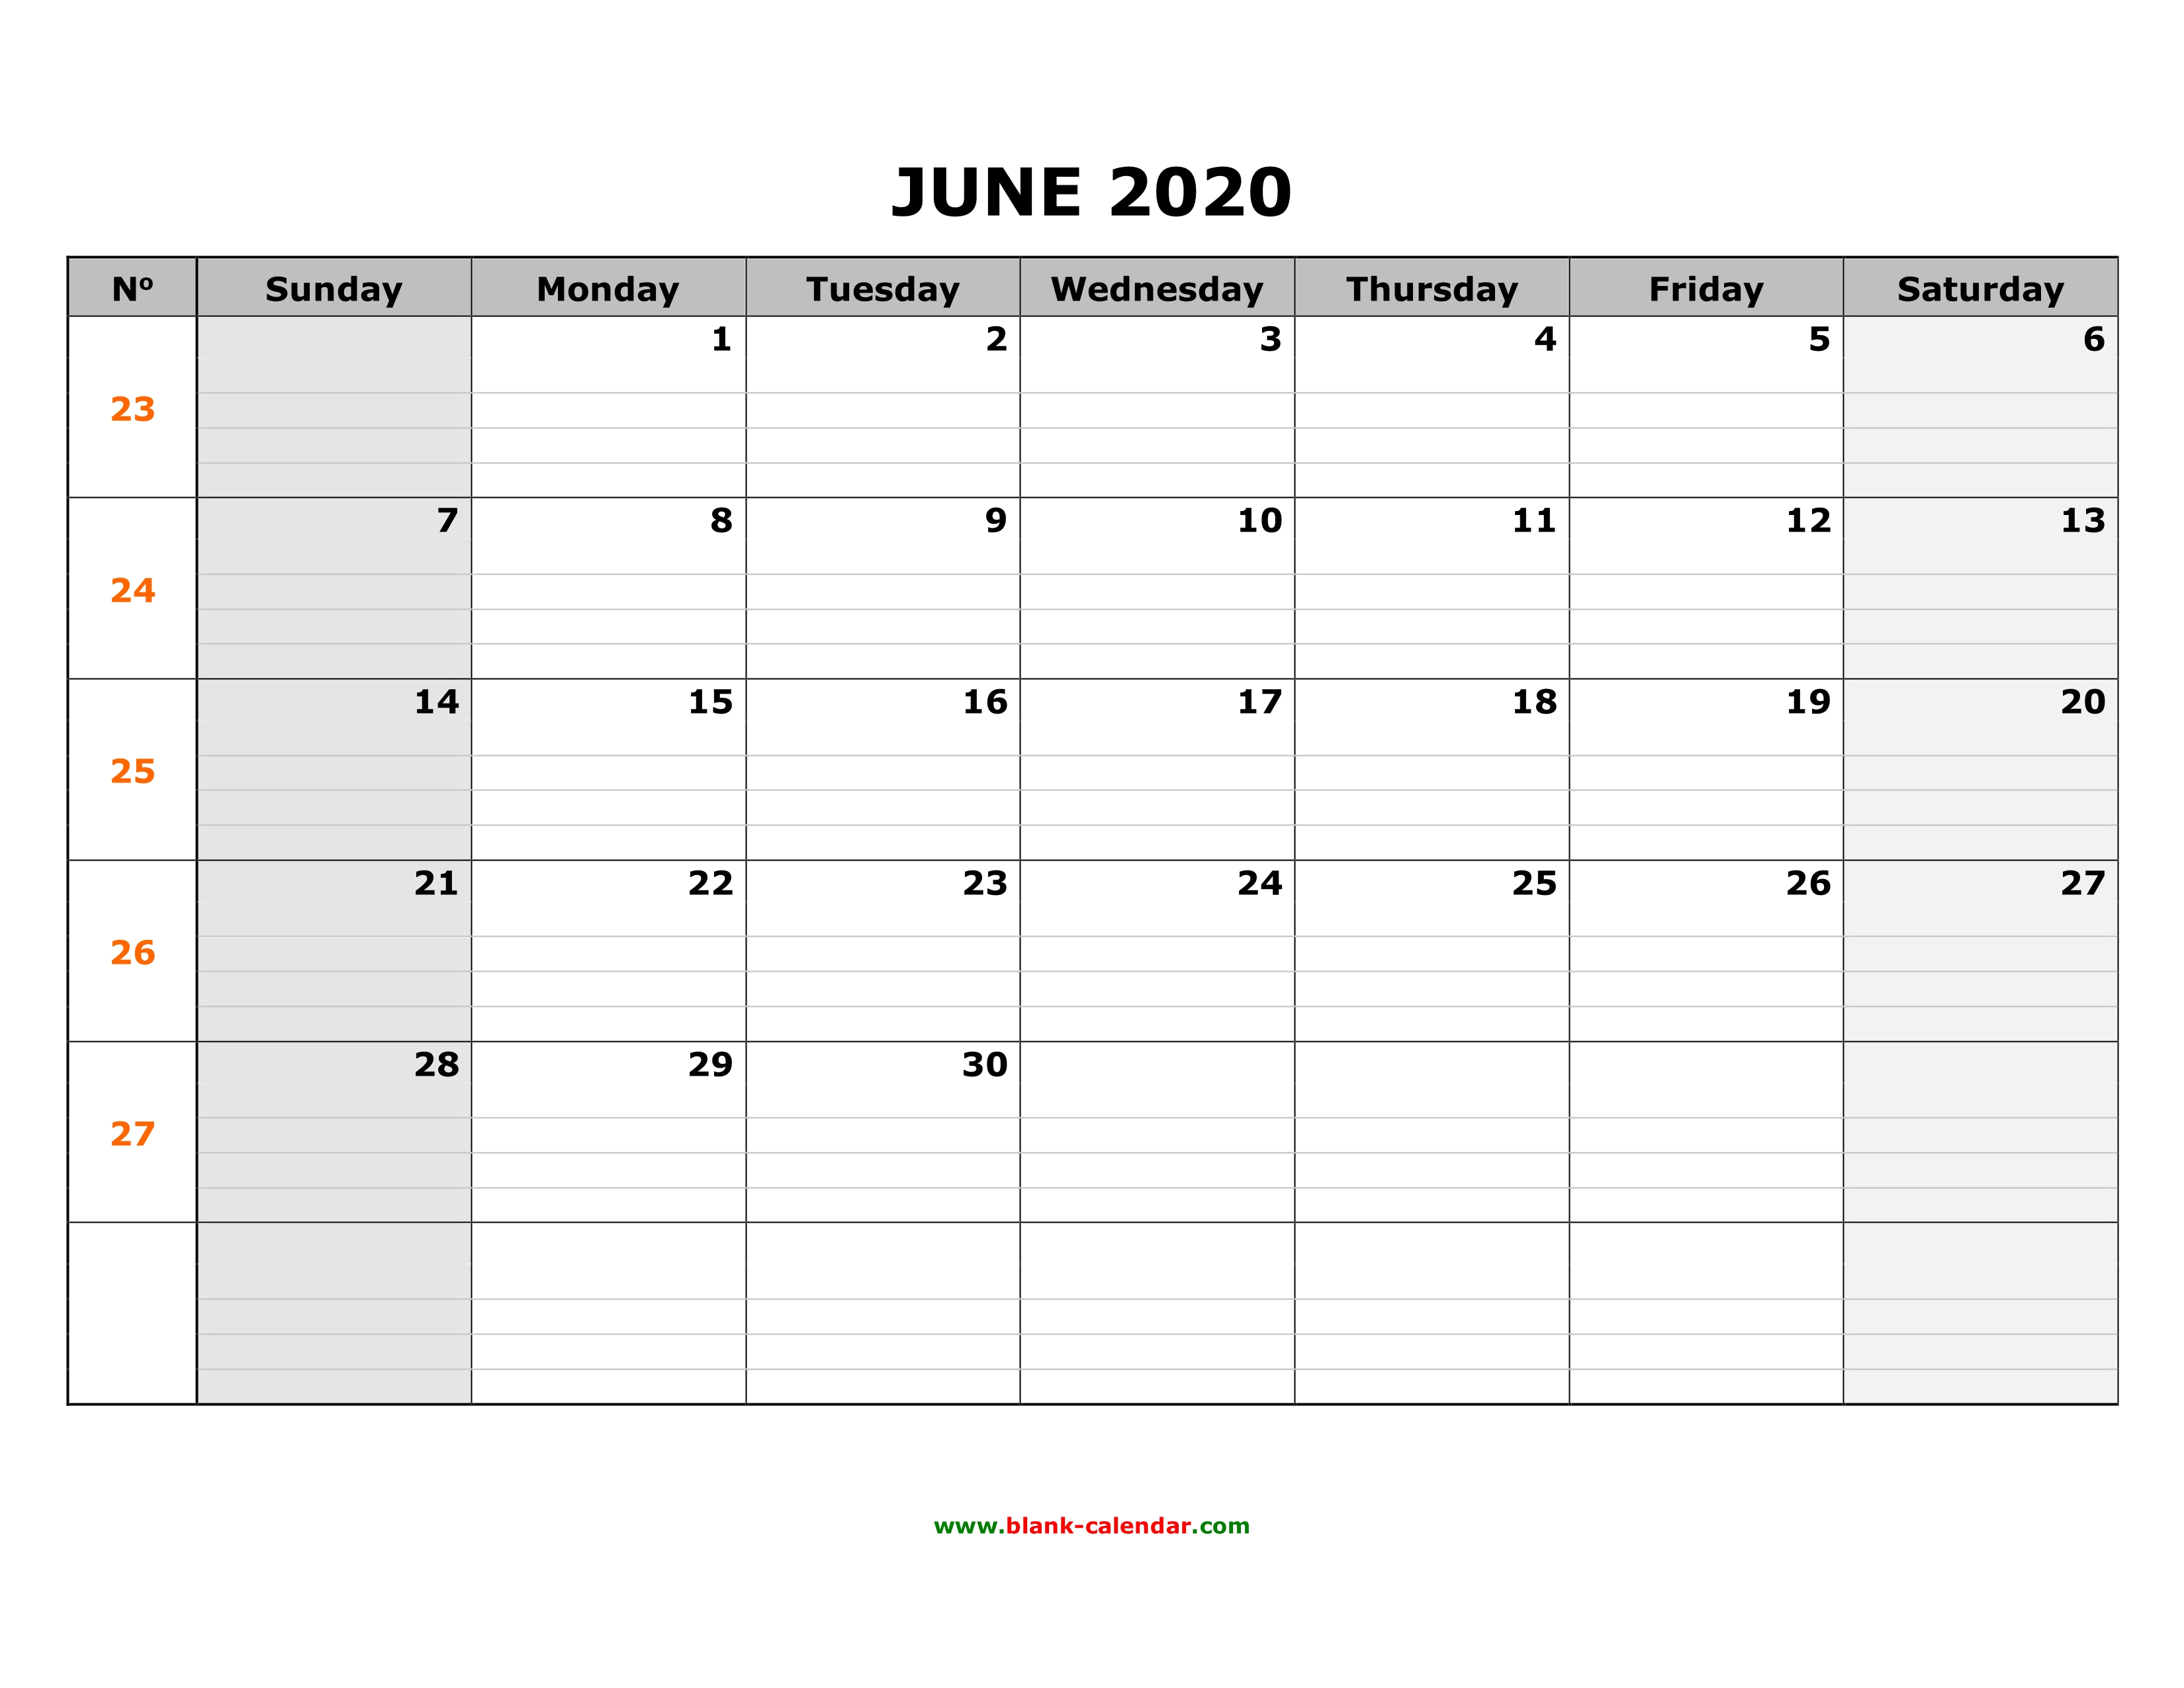 free download printable june 2020 calendar large box grid space for notes